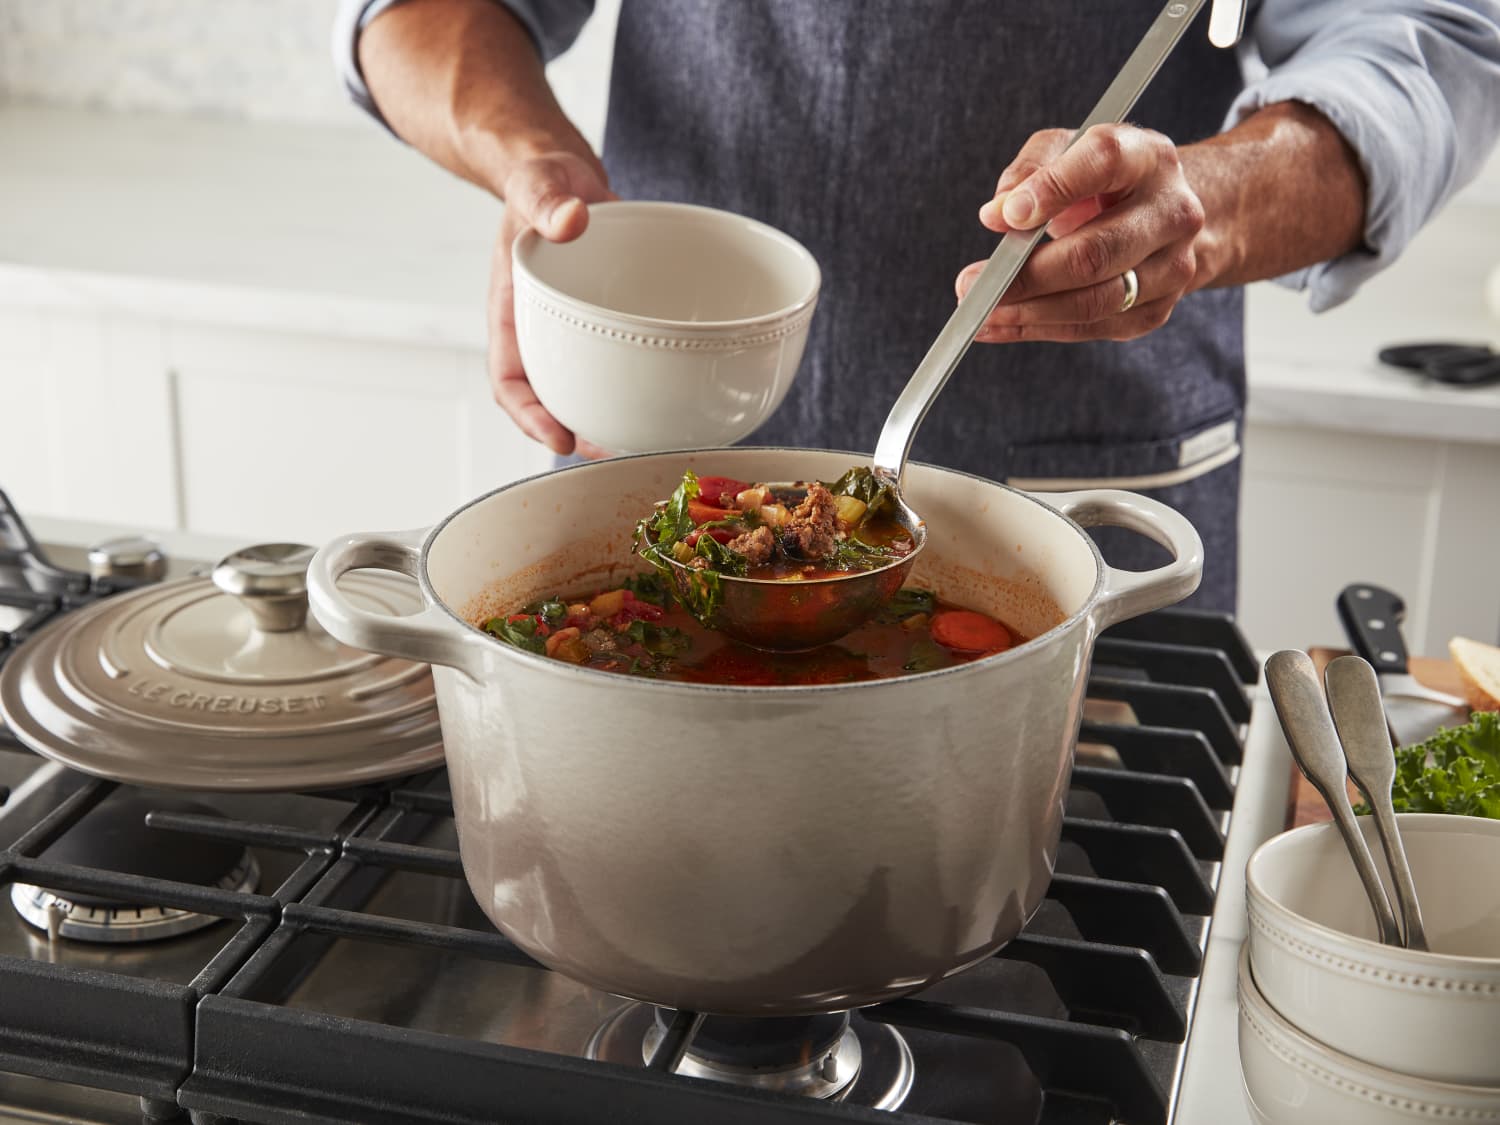 Le Creuset Launches New Fall 2022 Color Nutmeg